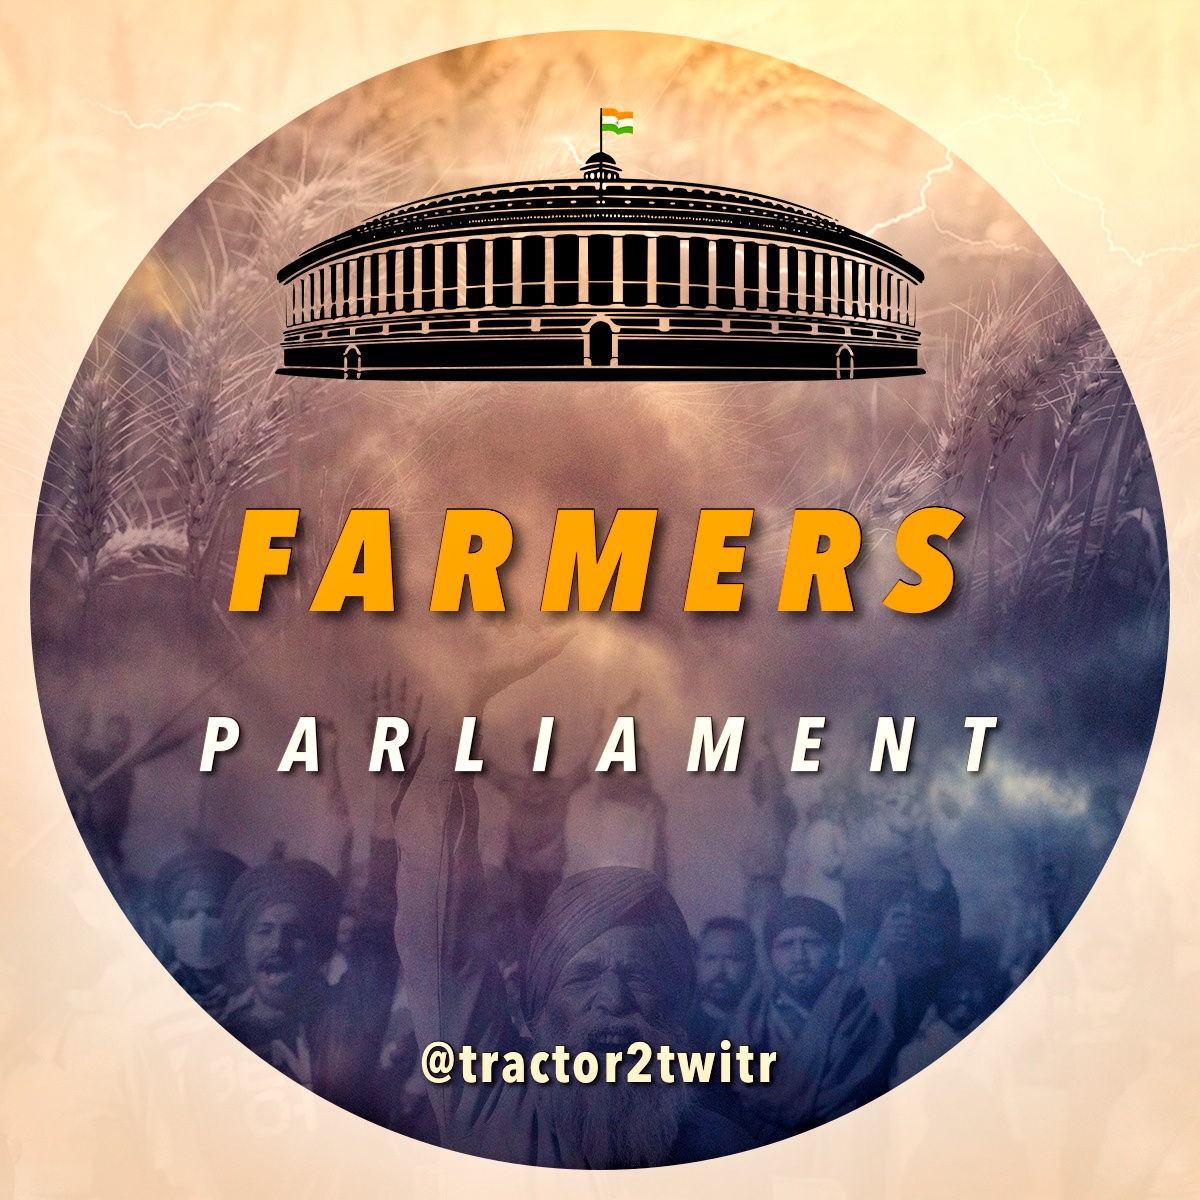 RT @Tractor2twitr: Lets support our farmers and amplify their voices.

#FarmersParliament https://t.co/sVYL1lnFZz